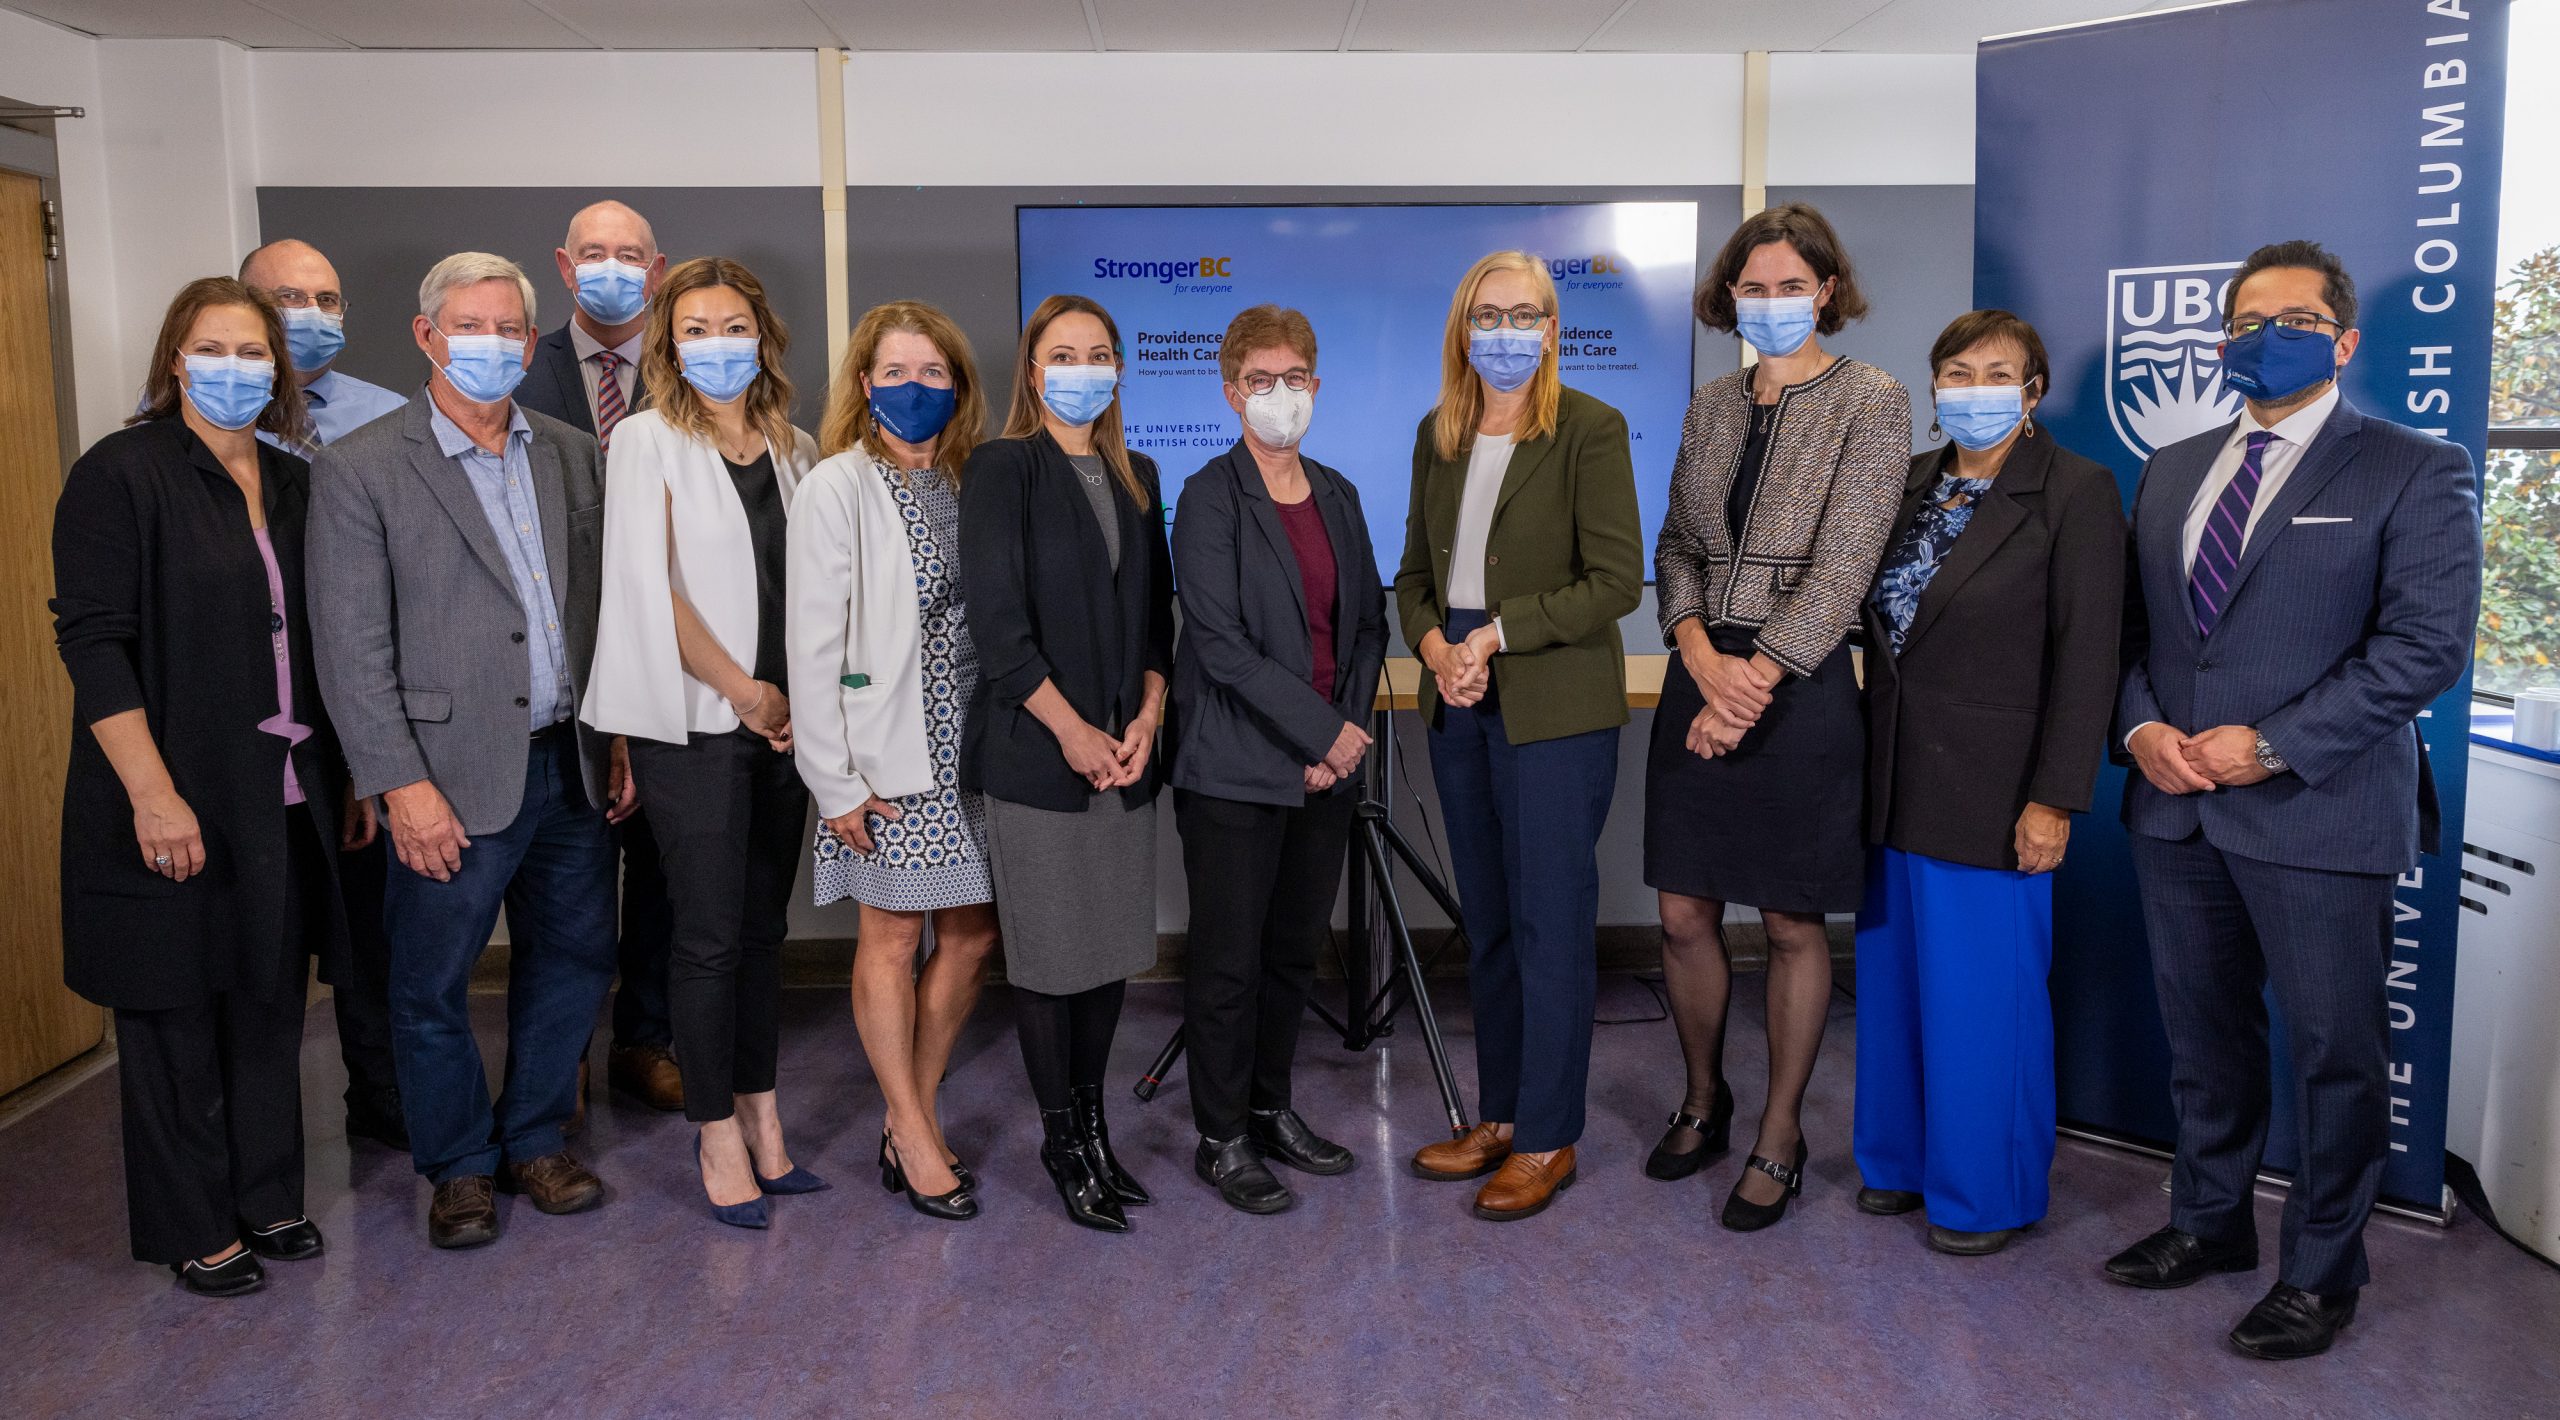 The Honourable Brenda Bailey (fourth from right) joined by members of B.C.’s life sciences community at the clinical trials announcement, including UBC’s Dr. Gail Murphy (fifth from right), Dr. Robert McMaster (third from left) and Dr. Michelle Wong (fifth from left).